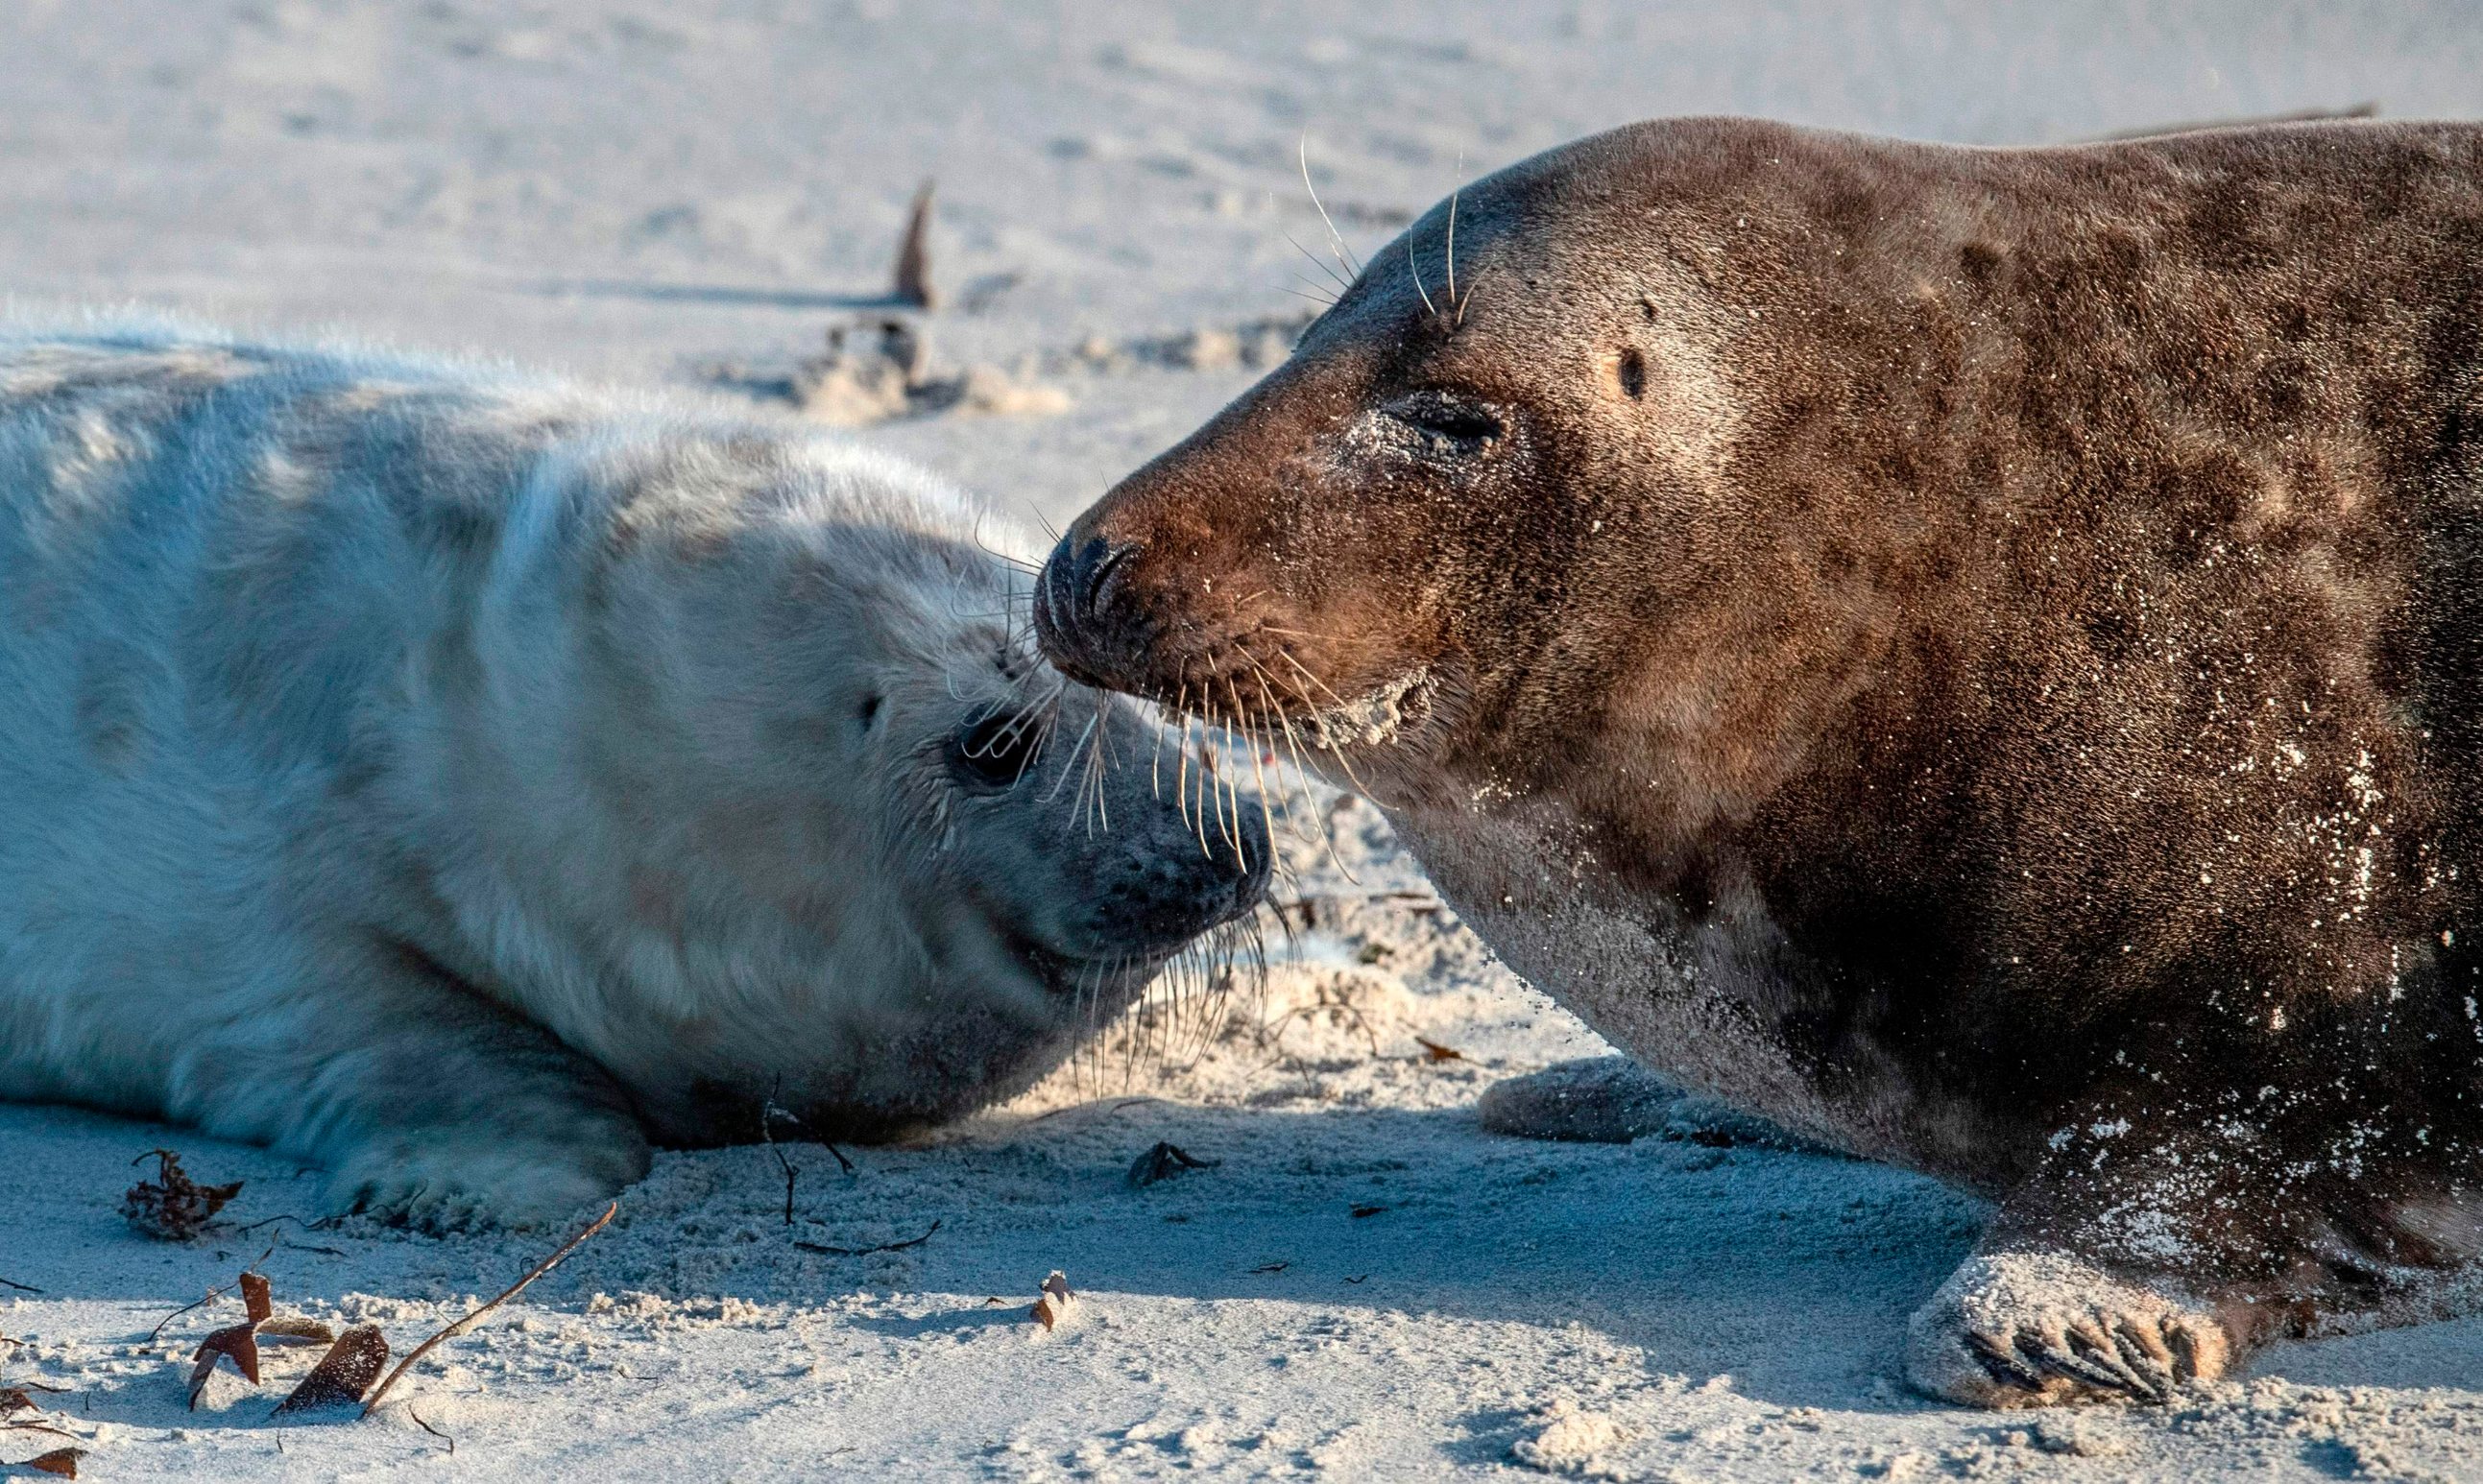 A female grey seal (R) interacts with her pup on the north Sea island of Helgoland, Germany, on January 4, 2020. - Hundreds of Grey Seals use the island to give birth to their pups, usually between the months of November and January. The pups, after 3 weeks of nursing, are then left to fend for themselves. 524 grey seal births have been recorded in the period from November 13 to December 26, 2019. (Photo by John MACDOUGALL / AFP)